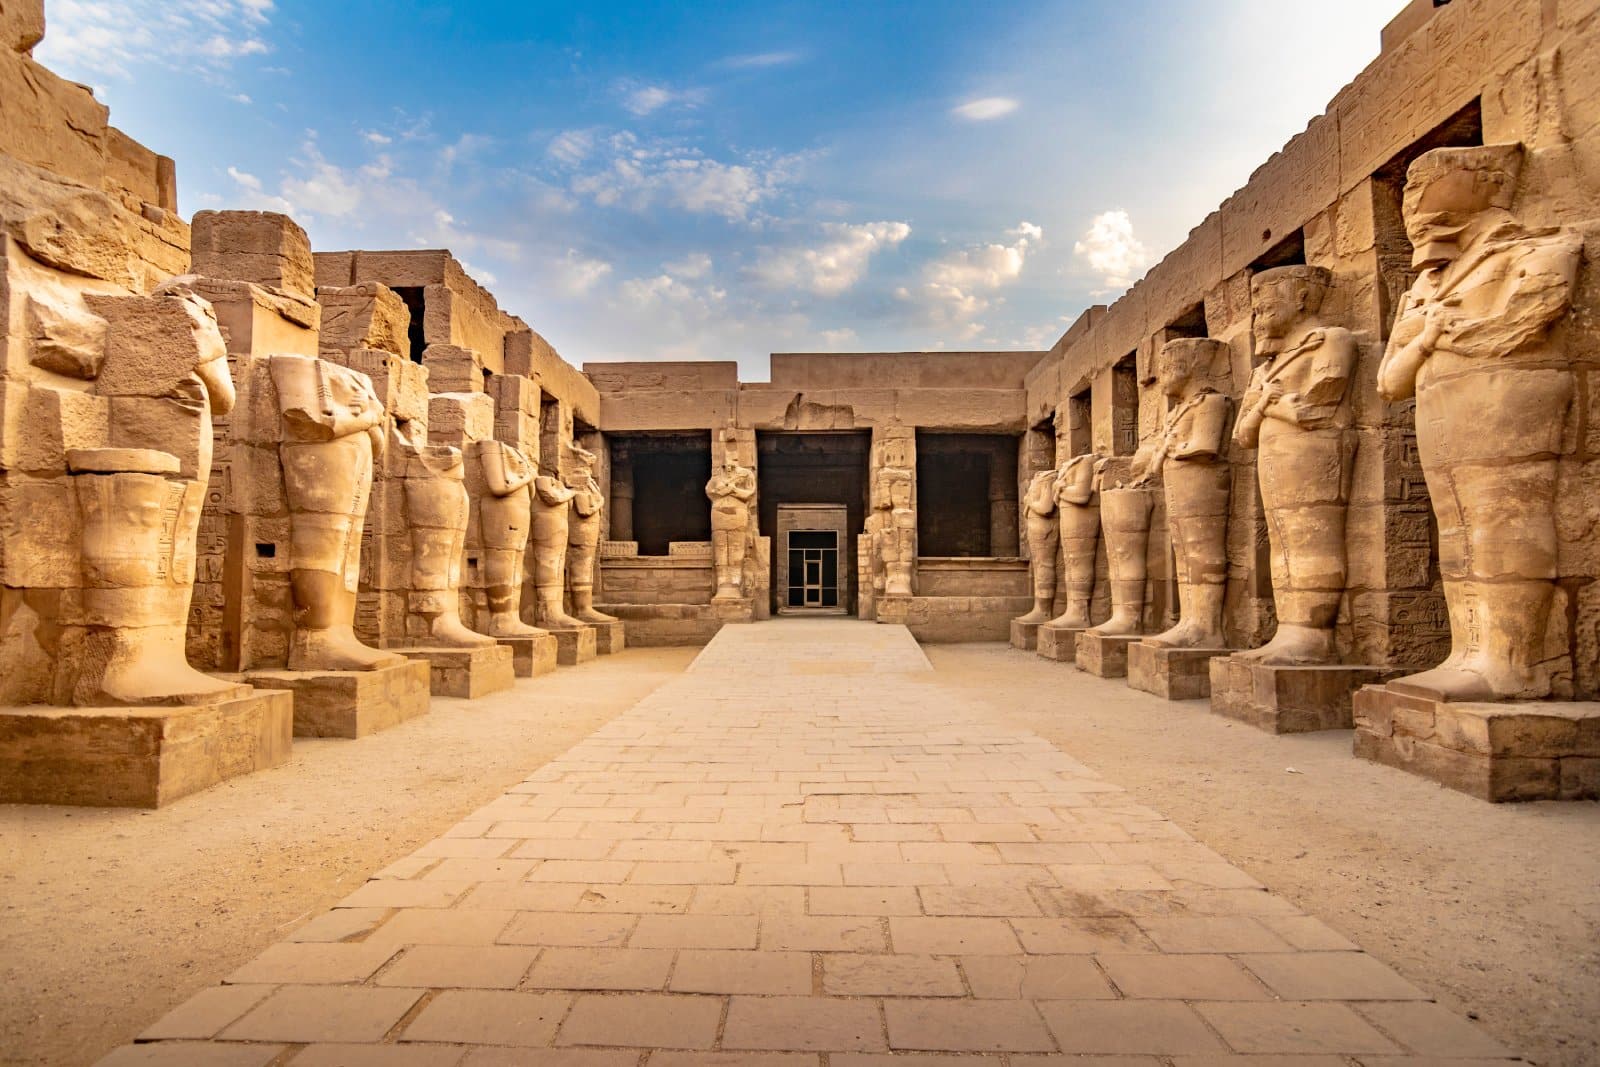 <p class="wp-caption-text">Image Credit: Shutterstock / Bist</p>  <p><span>Luxor, often called the world’s greatest open-air museum, holds treasures beyond time. At its heart, the Karnak Temple complex, a vast open-air museum of decayed temples, chapels, pylons, and other buildings primarily dedicated to Amun, highlights the religious devotion spanning over two thousand years. Walking through the Great Hypostyle Hall, with its towering columns inscribed with hieroglyphs, one can’t help but feel dwarfed by the ancient architects’ ambition and skill. Across the Nile, the Valley of the Kings offers a stark contrast with its hidden underground tombs, where the pharaohs of the New Kingdom period were laid to rest amidst riches and elaborate decorations intended for their journey into the afterlife. The tombs, including that of the young pharaoh Tutankhamun, reveal exquisite artistry and deep religious beliefs, offering a poignant glimpse into the Egyptians’ views on mortality and immortality.</span></p>